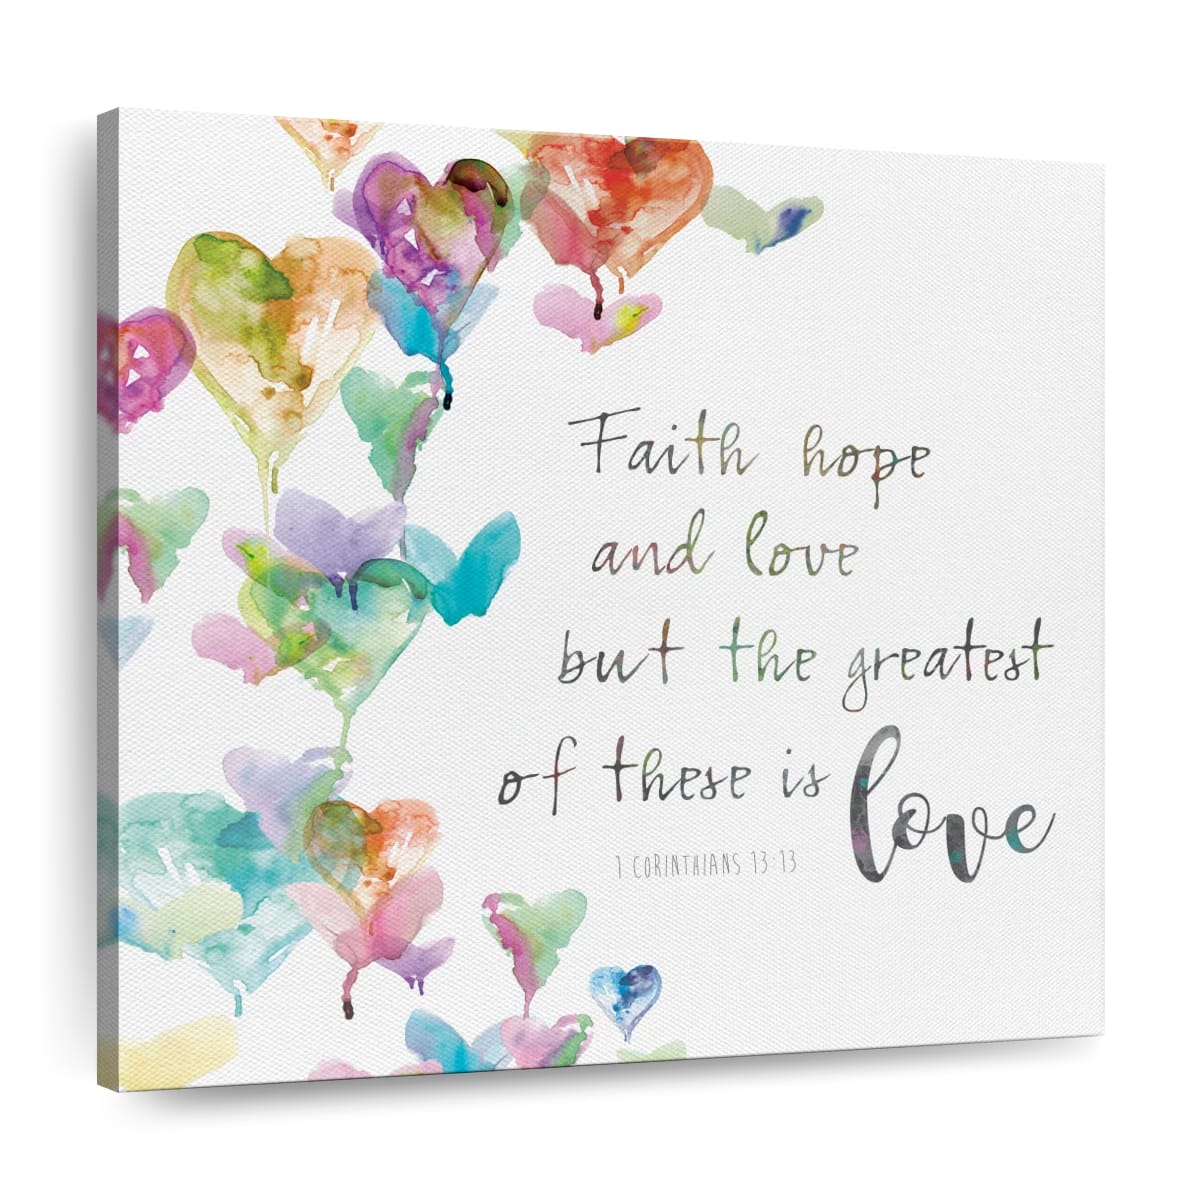 Faith Hope And Love Square Canvas Wall Art - Bible Verse Wall Art Canvas - Religious Wall Hanging